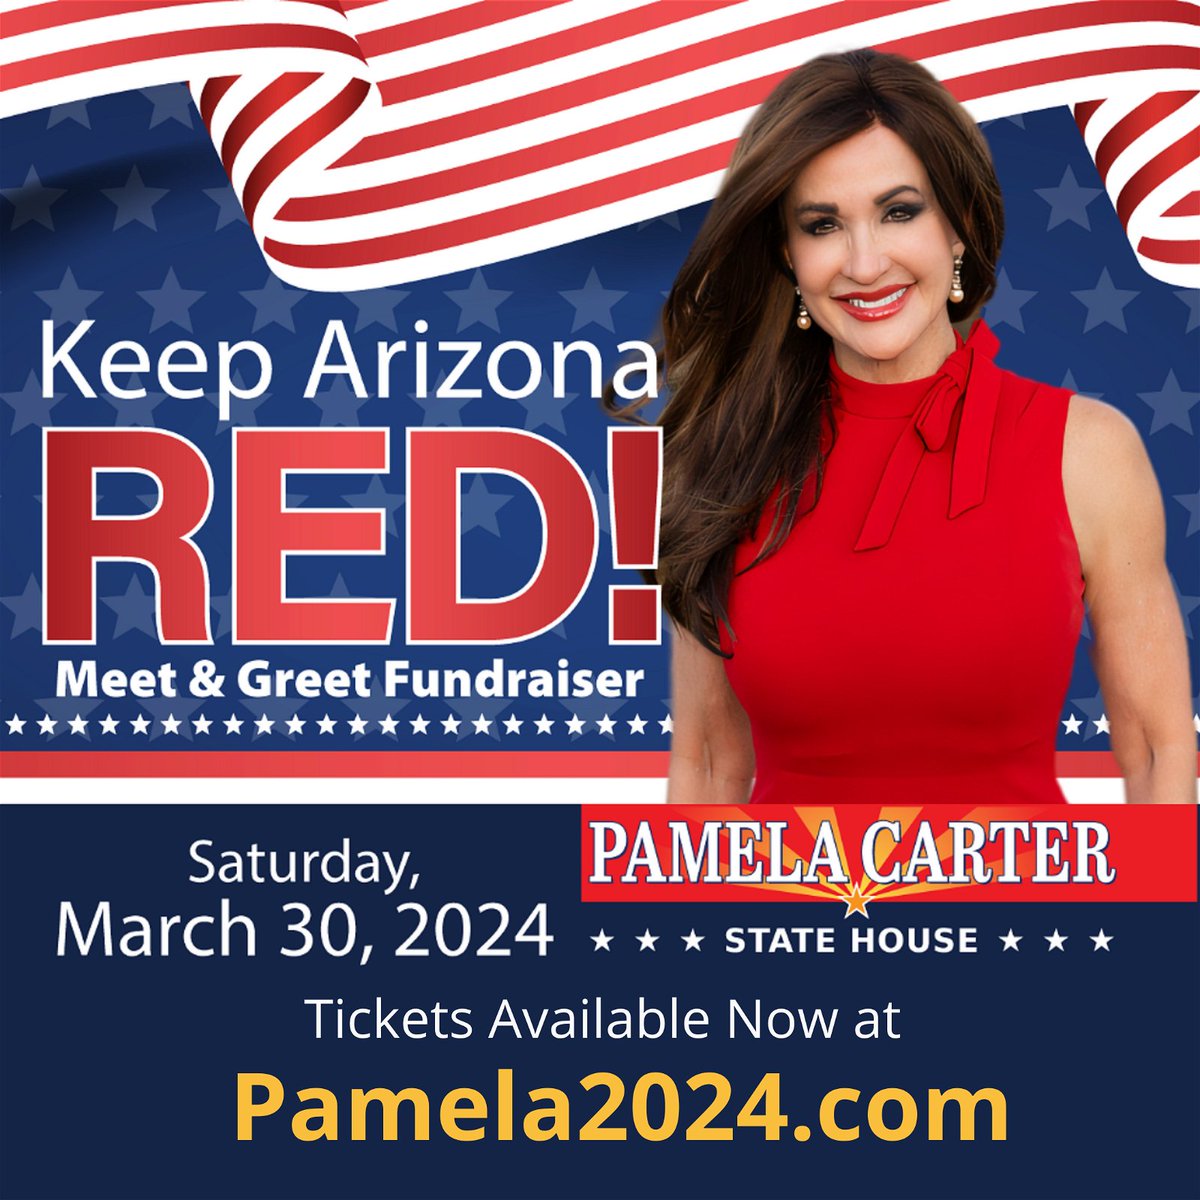 Join me and some friends on March 30th to plan how to keep Arizona red! Visit Pamela2024.om for tickets. #arizona #phoenix #az #scottsdale #scottsdaleaz #mesa #paradisevalley #phoenixaz #scottsdalearizona #maricopaaz #paradisevalleyaz